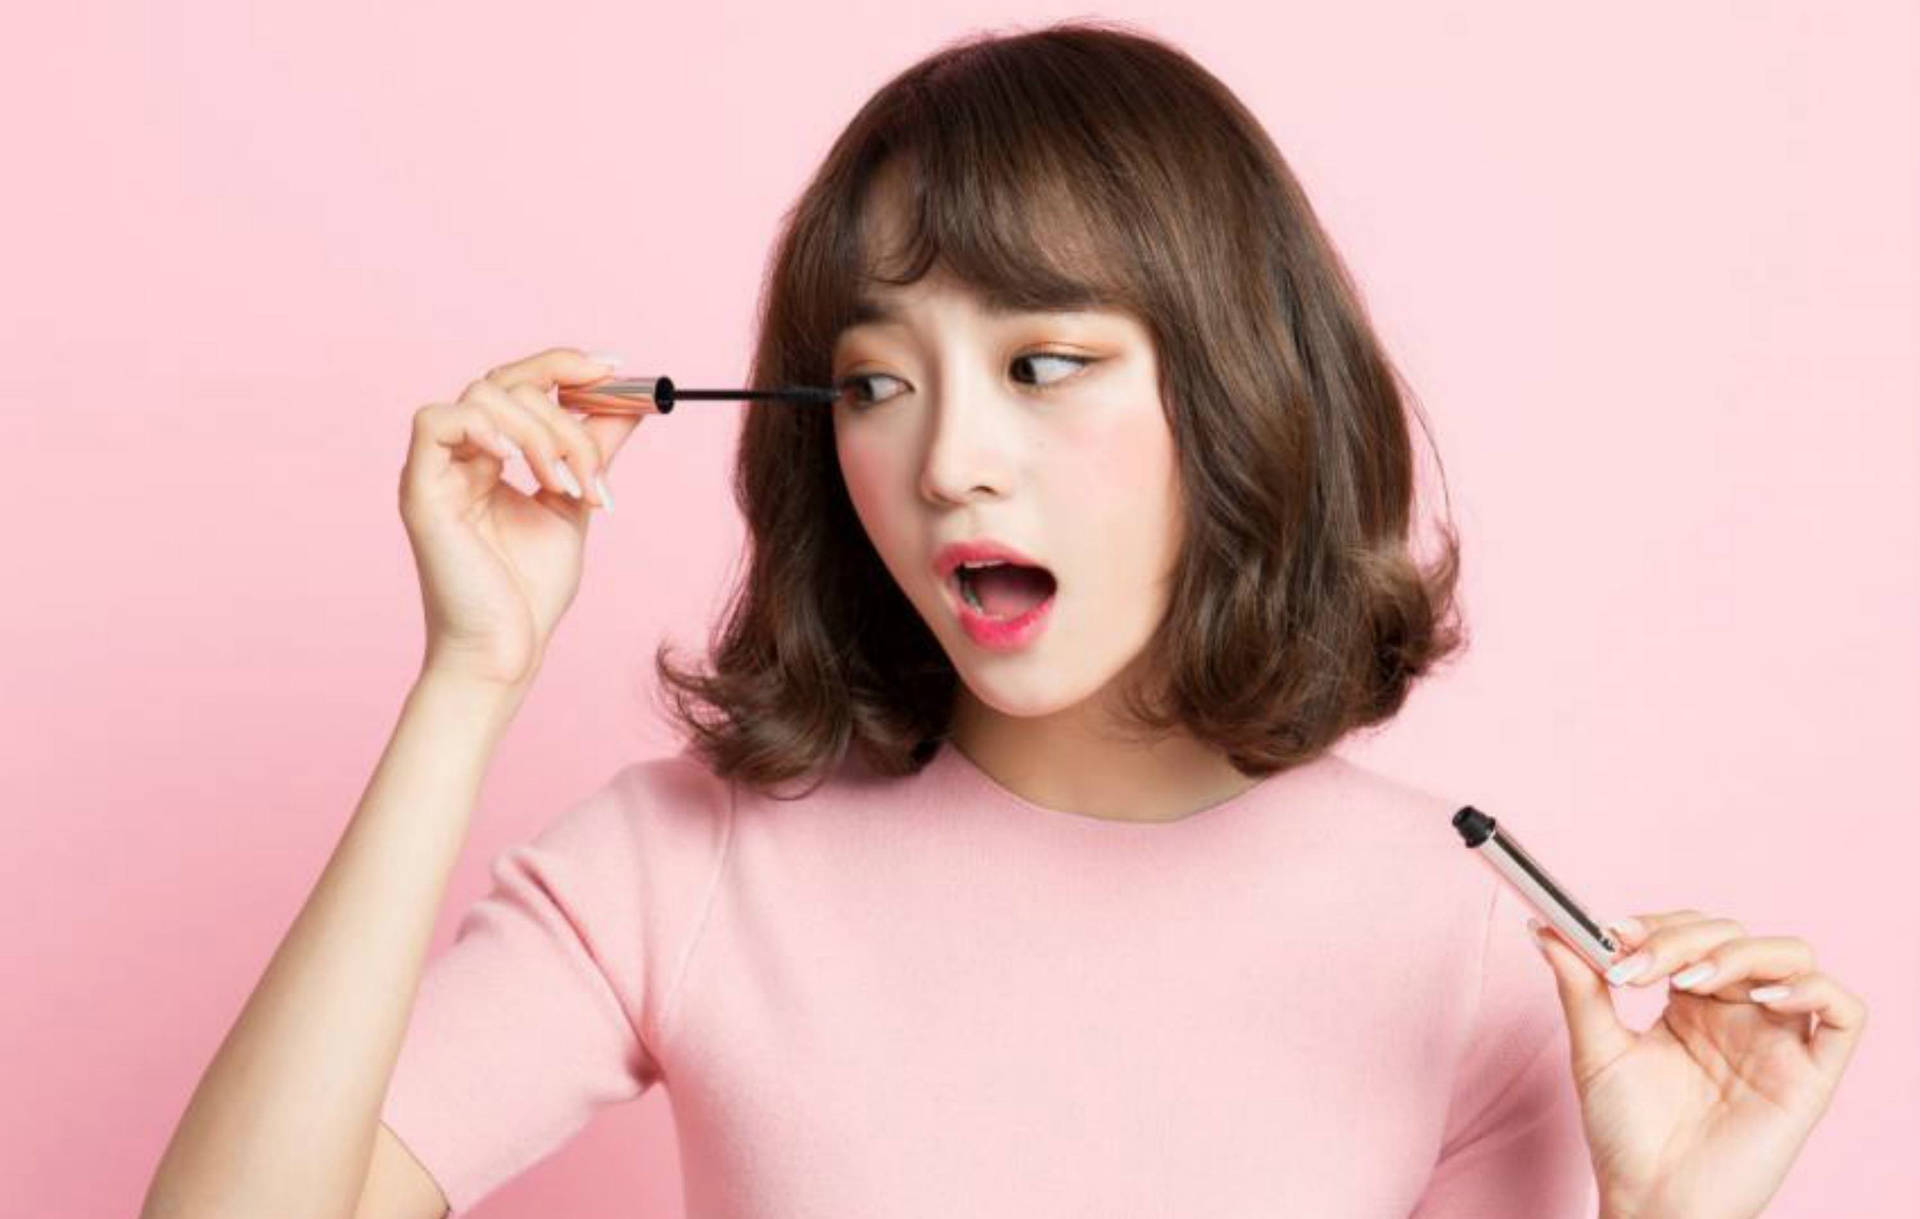 Caption: Kim Se Jeong Flaunting Cosmetic Products Wallpaper